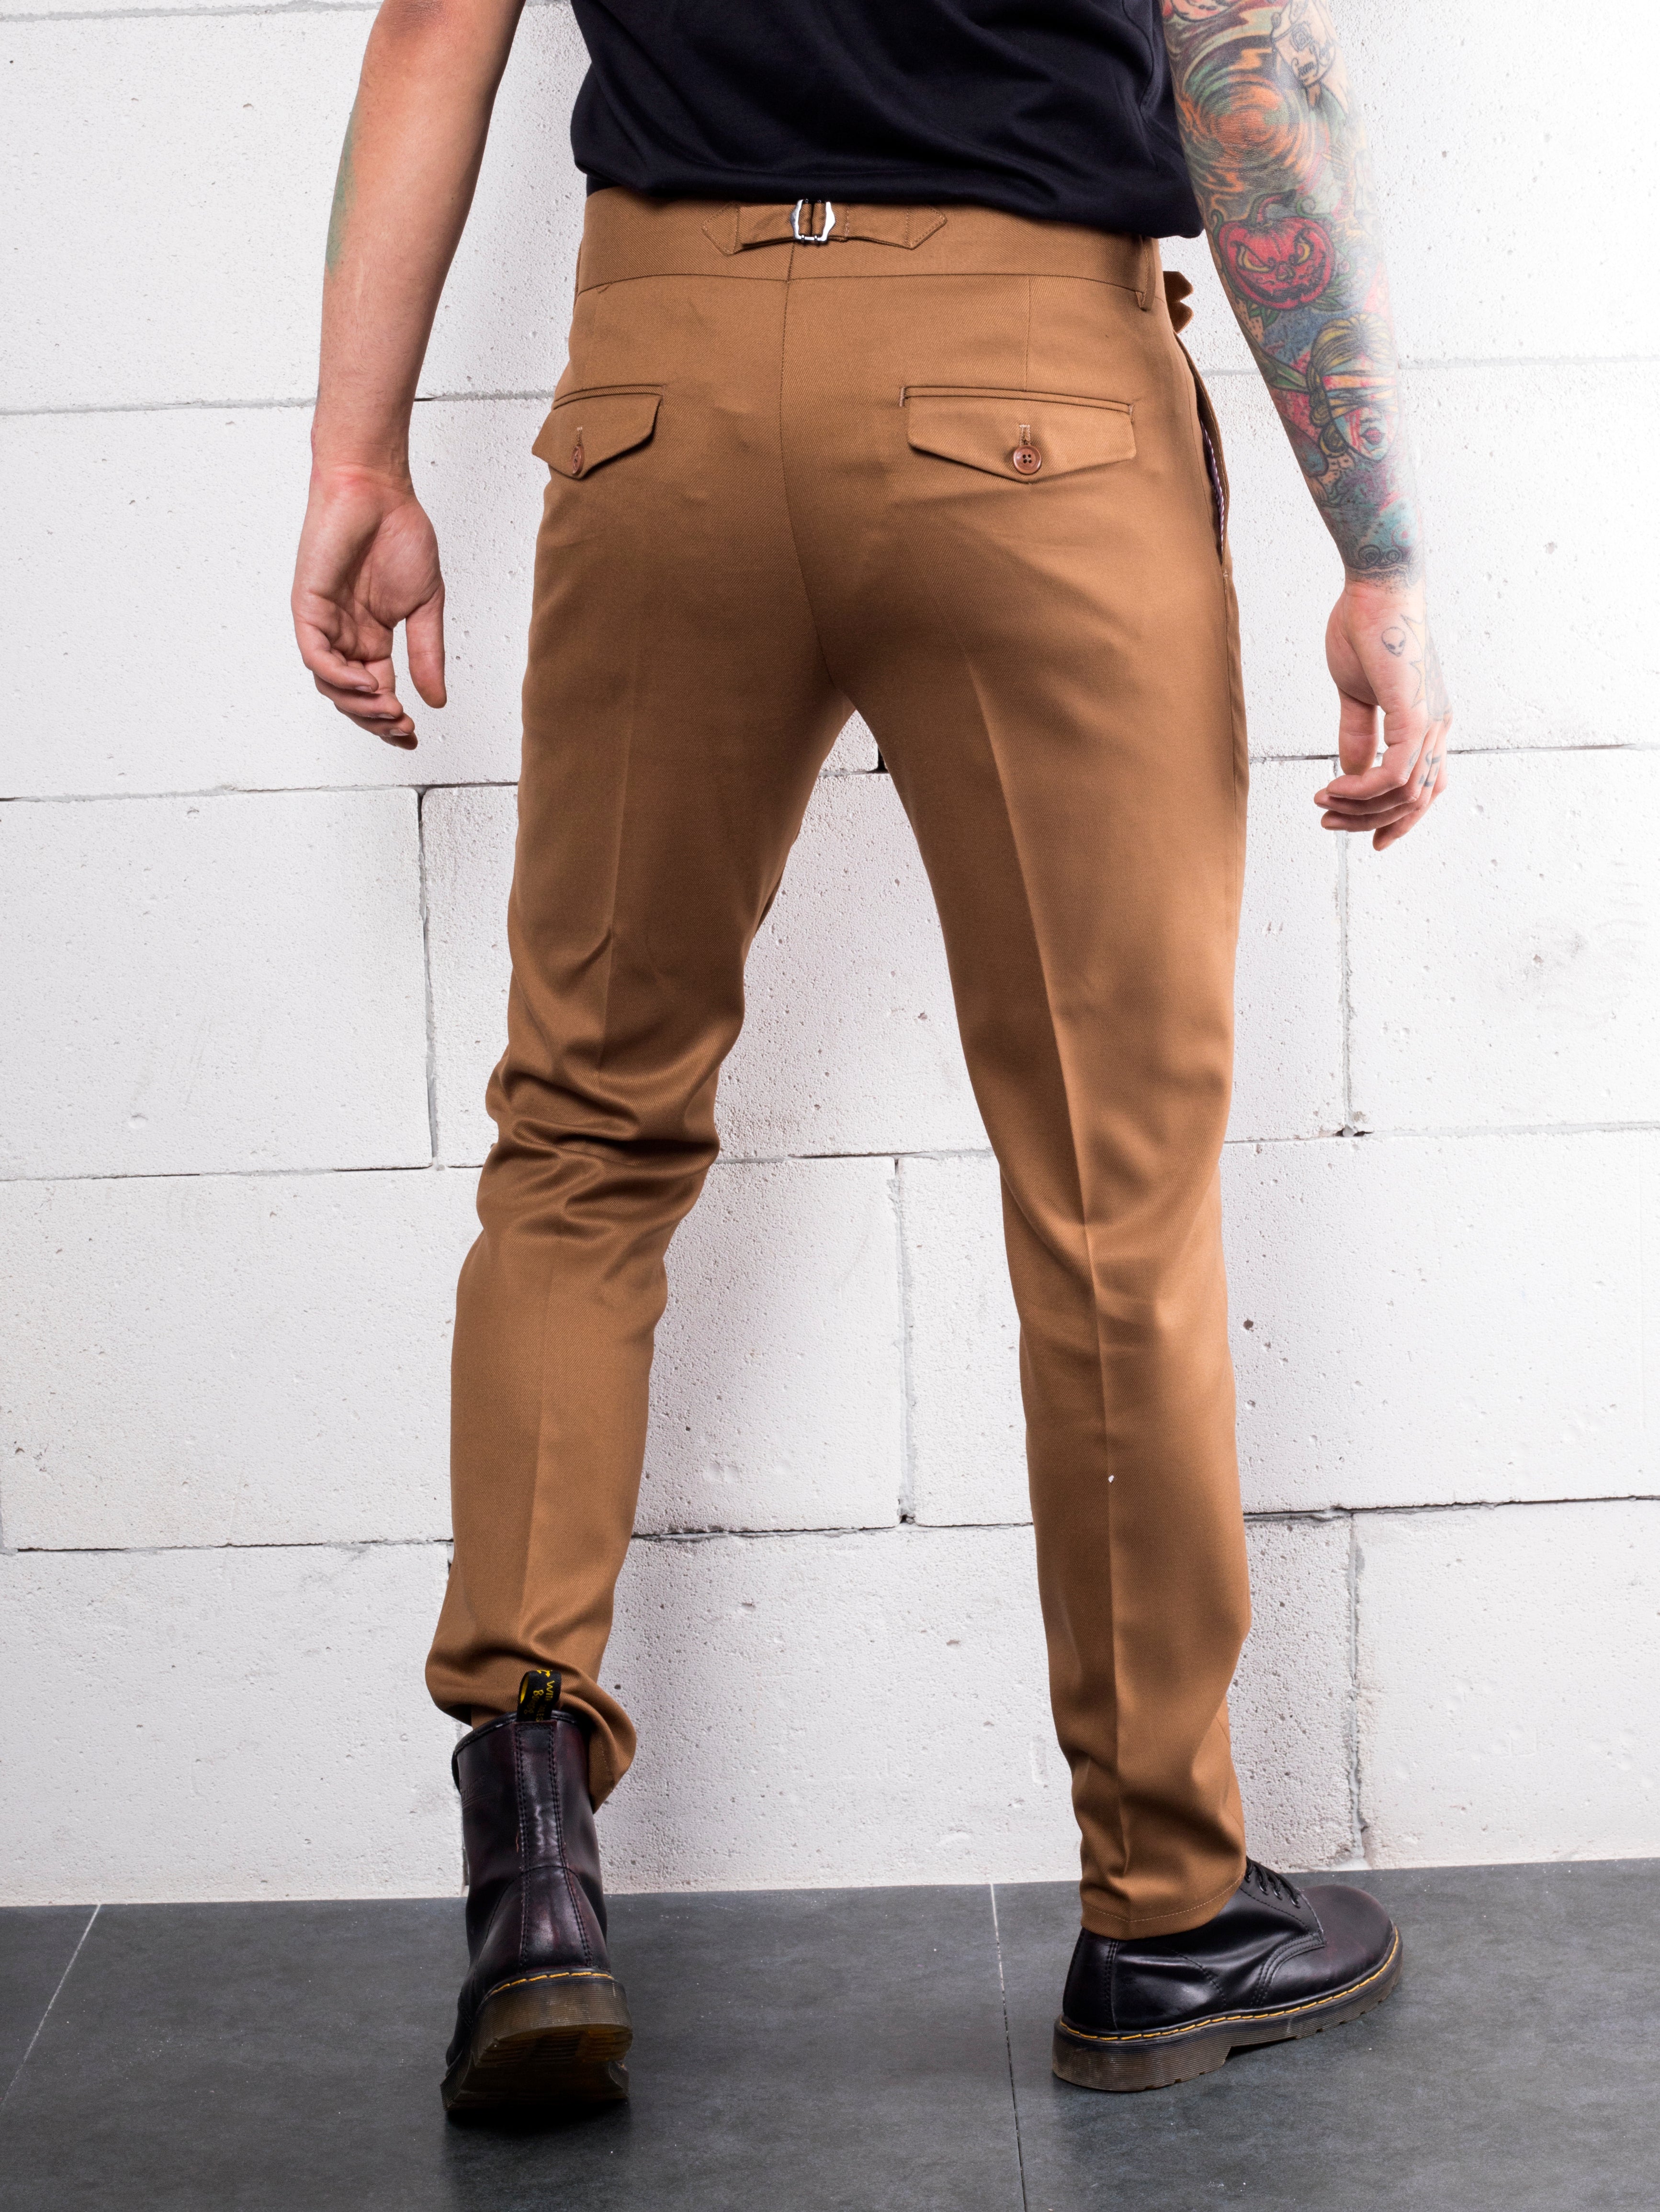 A man with tattoos wearing CROISSANT slacks made from Italian fabric.